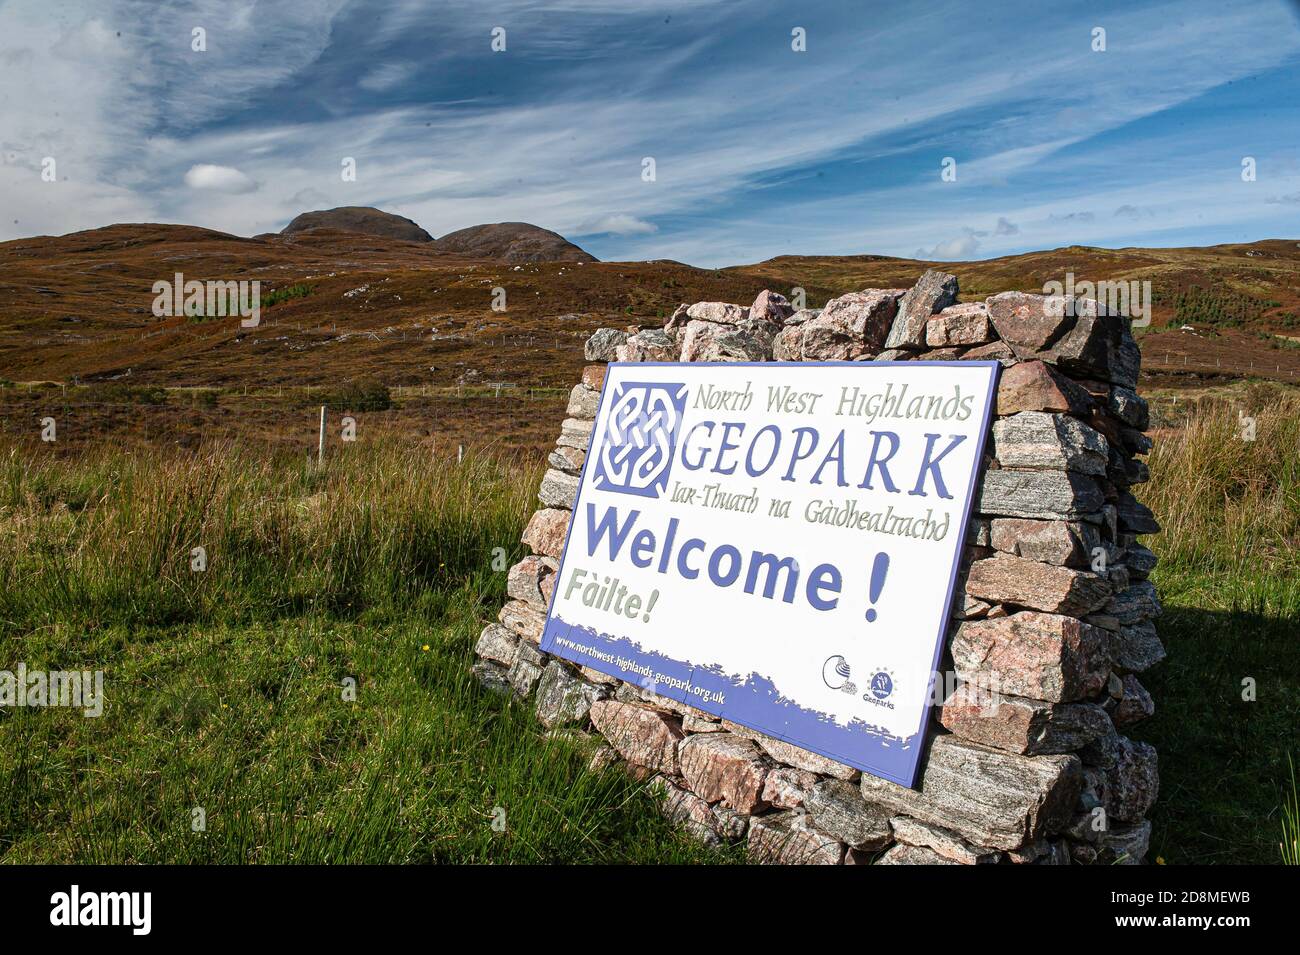 Welco to the Geopark in Sutherland in North West Scotland. Stock Photo